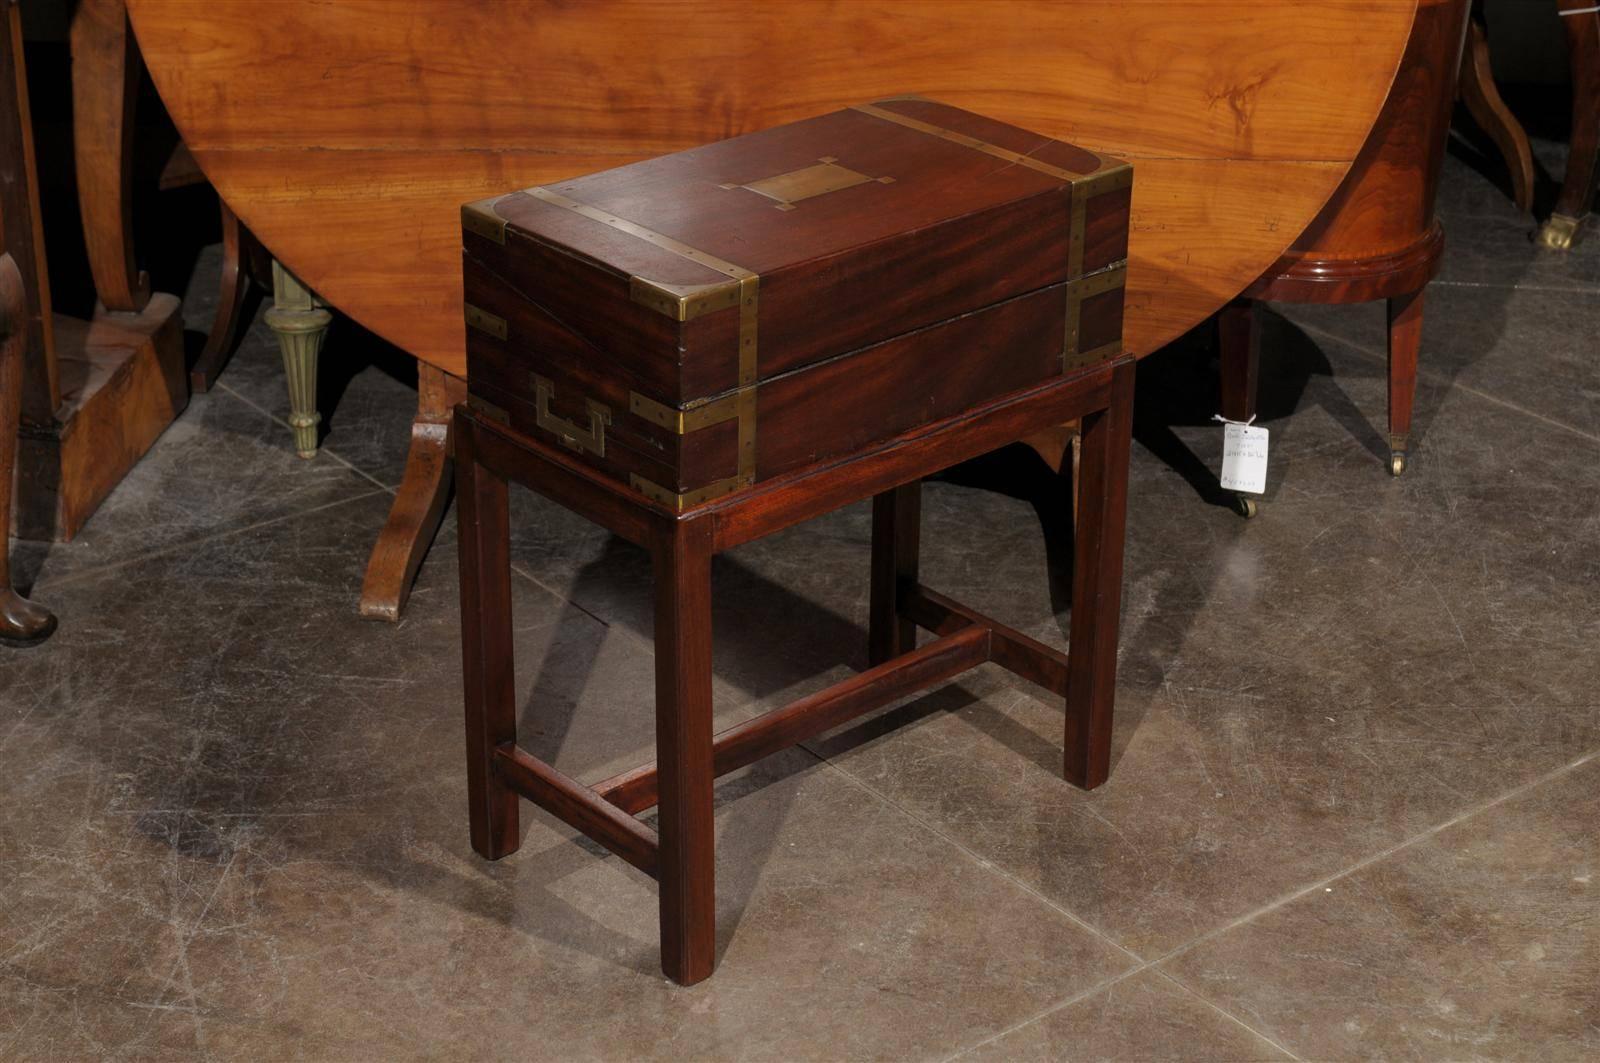 Campaign English Lap Desk Writing Box with Brass Accents and Custom Stand, circa 1860